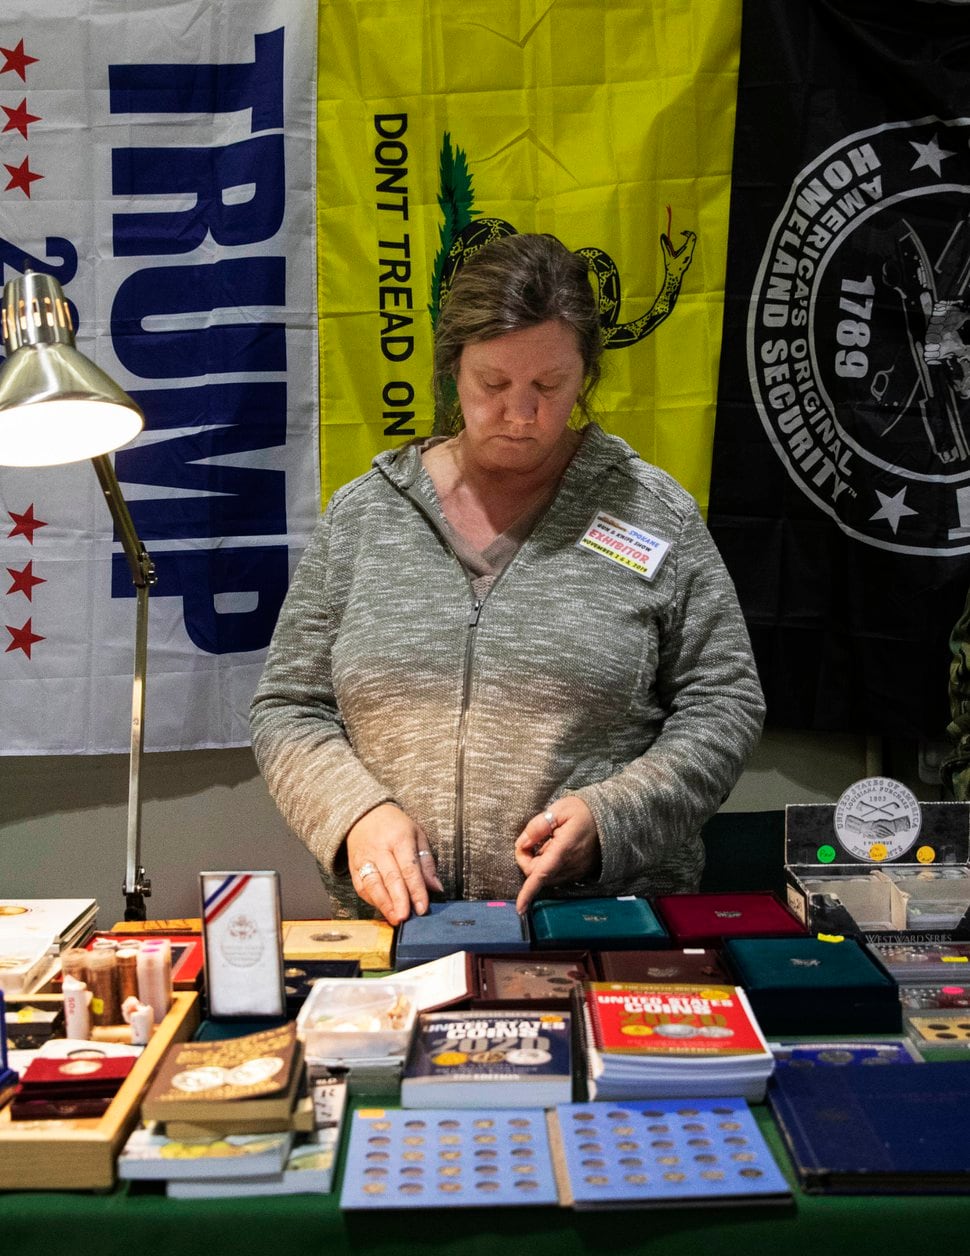 (Ruth Fremson | The New York Times) Shanna Torp, who became concerned about her father’s state of mind after her mother died following heart surgery, works her family’s collectible coins booth at a gun and knife show in Spokane, Wash., Nov. 4, 2019. A year after the coronavirus pandemic began, the toll of self-inflicted gun deaths has led to an unusual alliance between suicide-prevention advocates and gun-rights proponents; together they are devising new strategies to prevent suicide in a population committed to the Second Amendment and the right to bear arms.